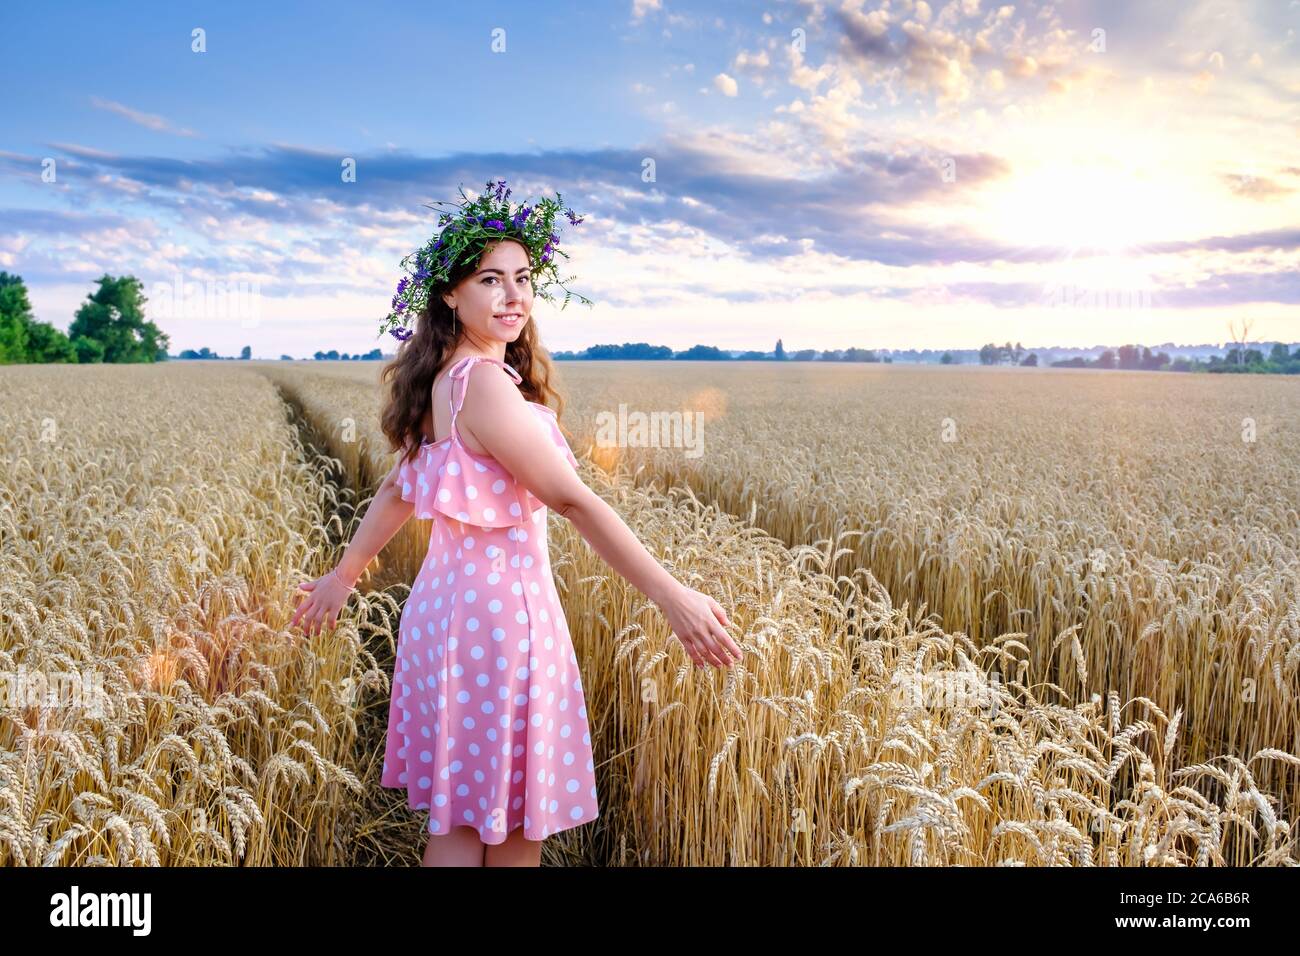 Young woman with flower wreath stands turning around and smiling Stock Photo